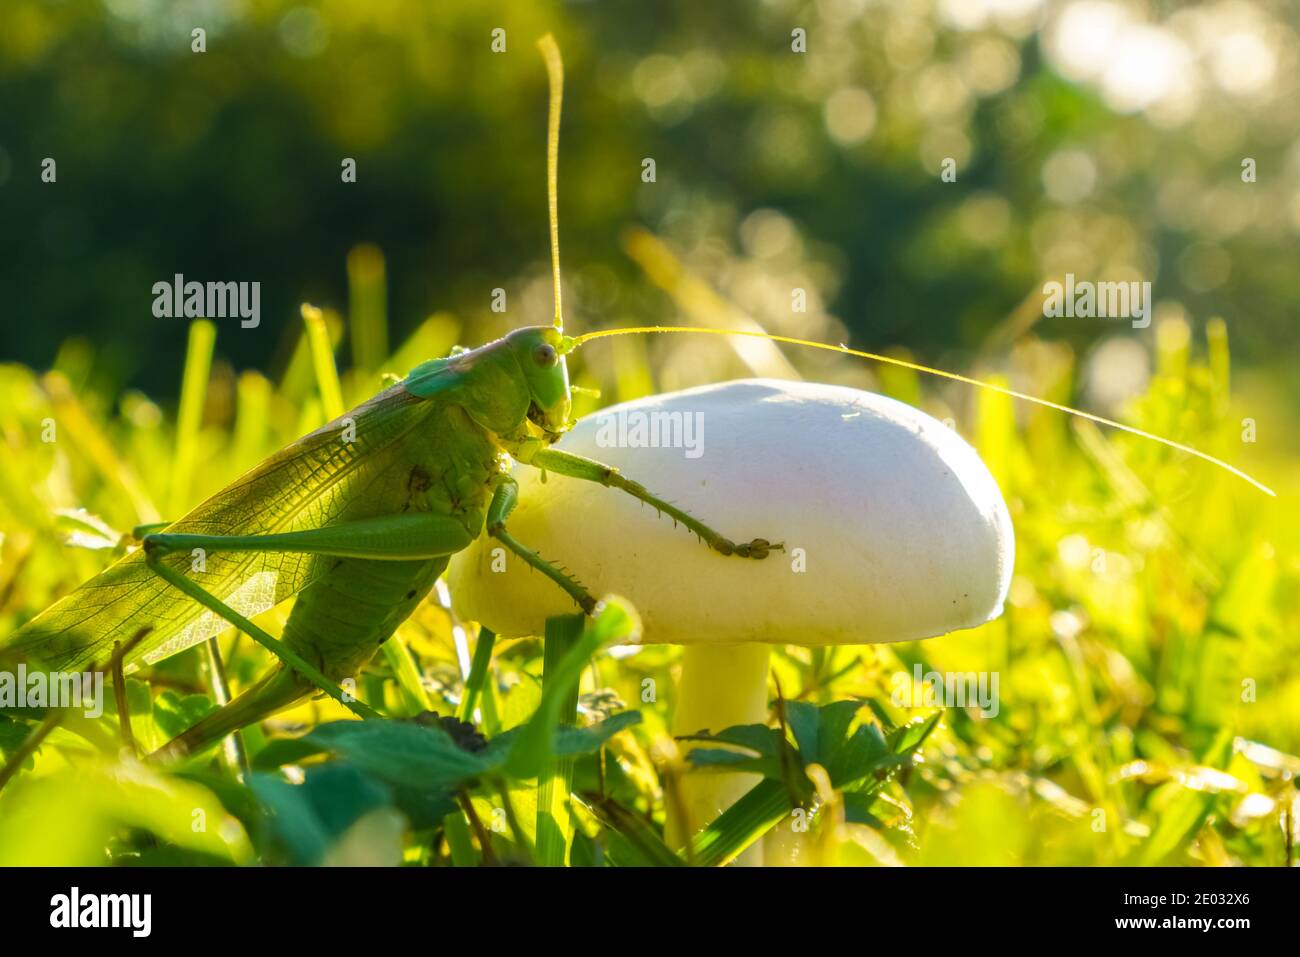 A green locust on a white mushroom in grass on a sunny day Stock Photo